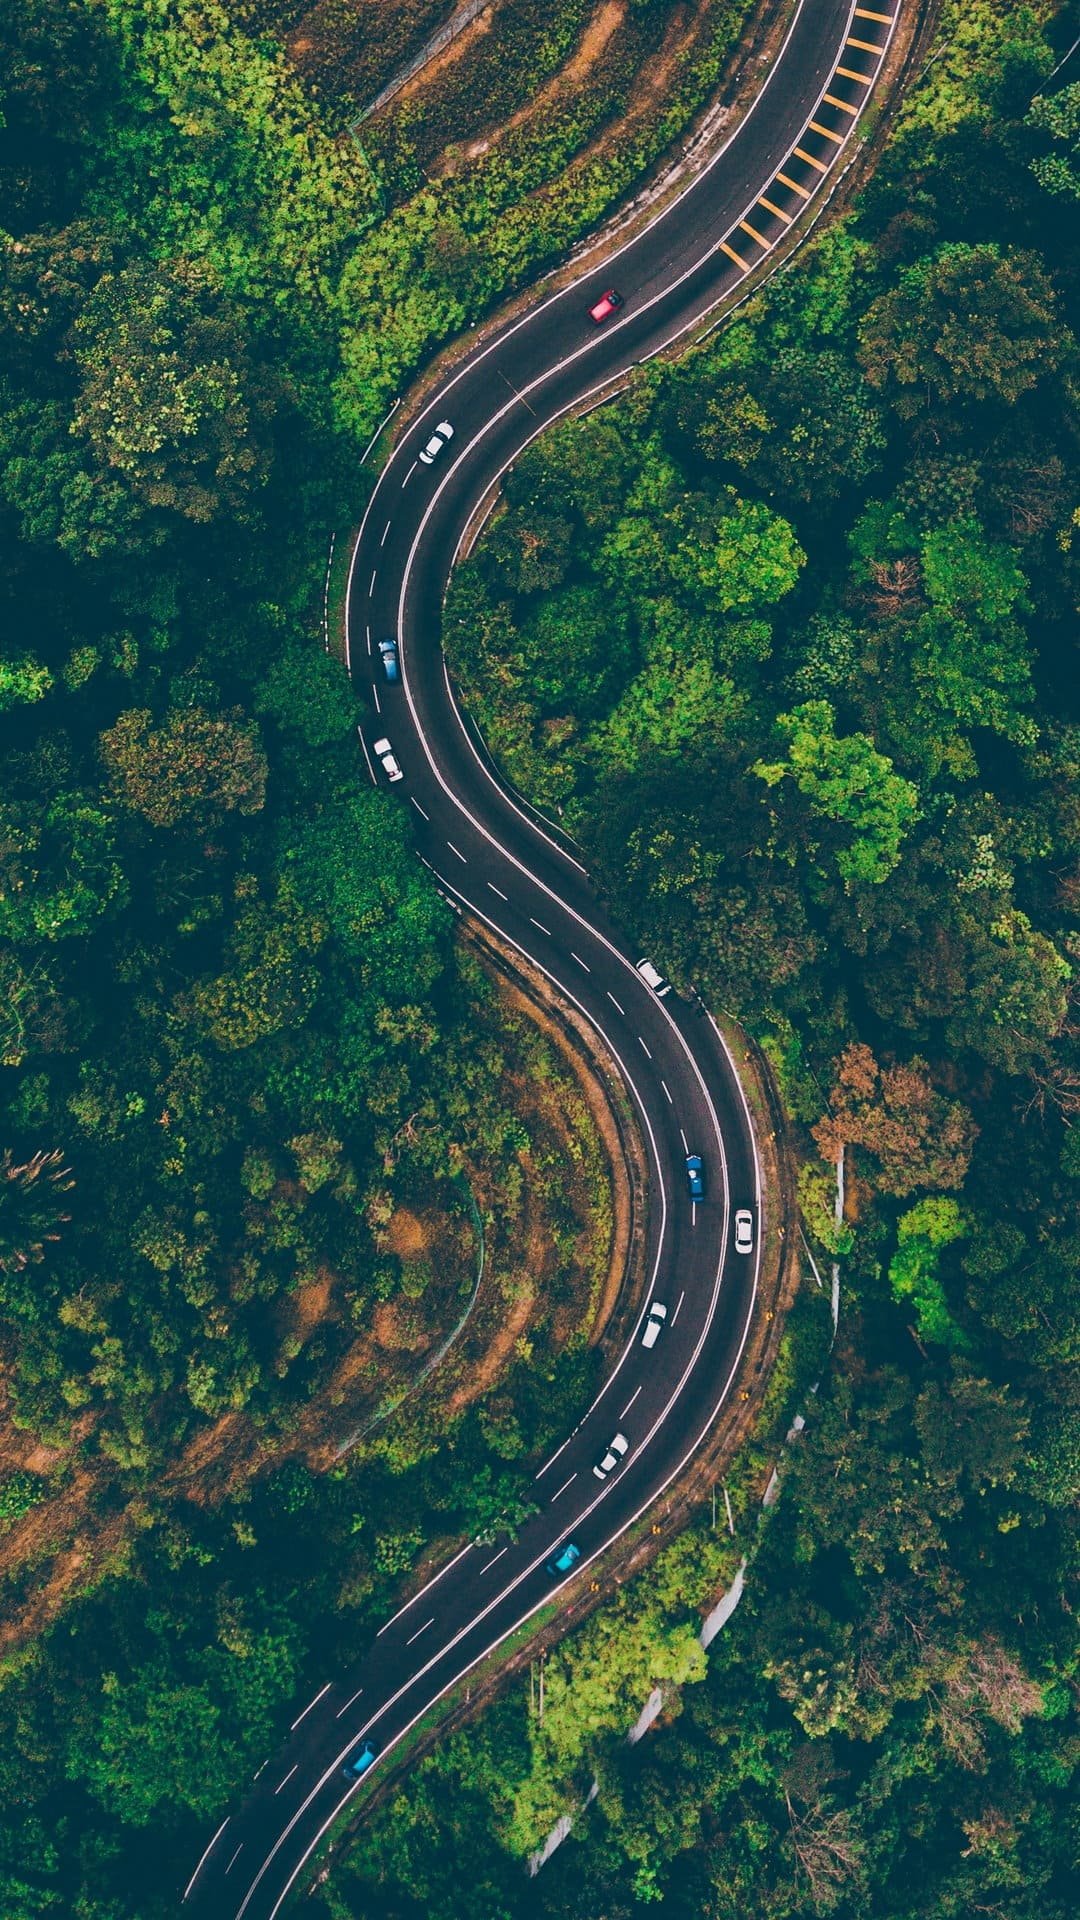 Road View From Above Trees Wallpaper 1080x1920 1